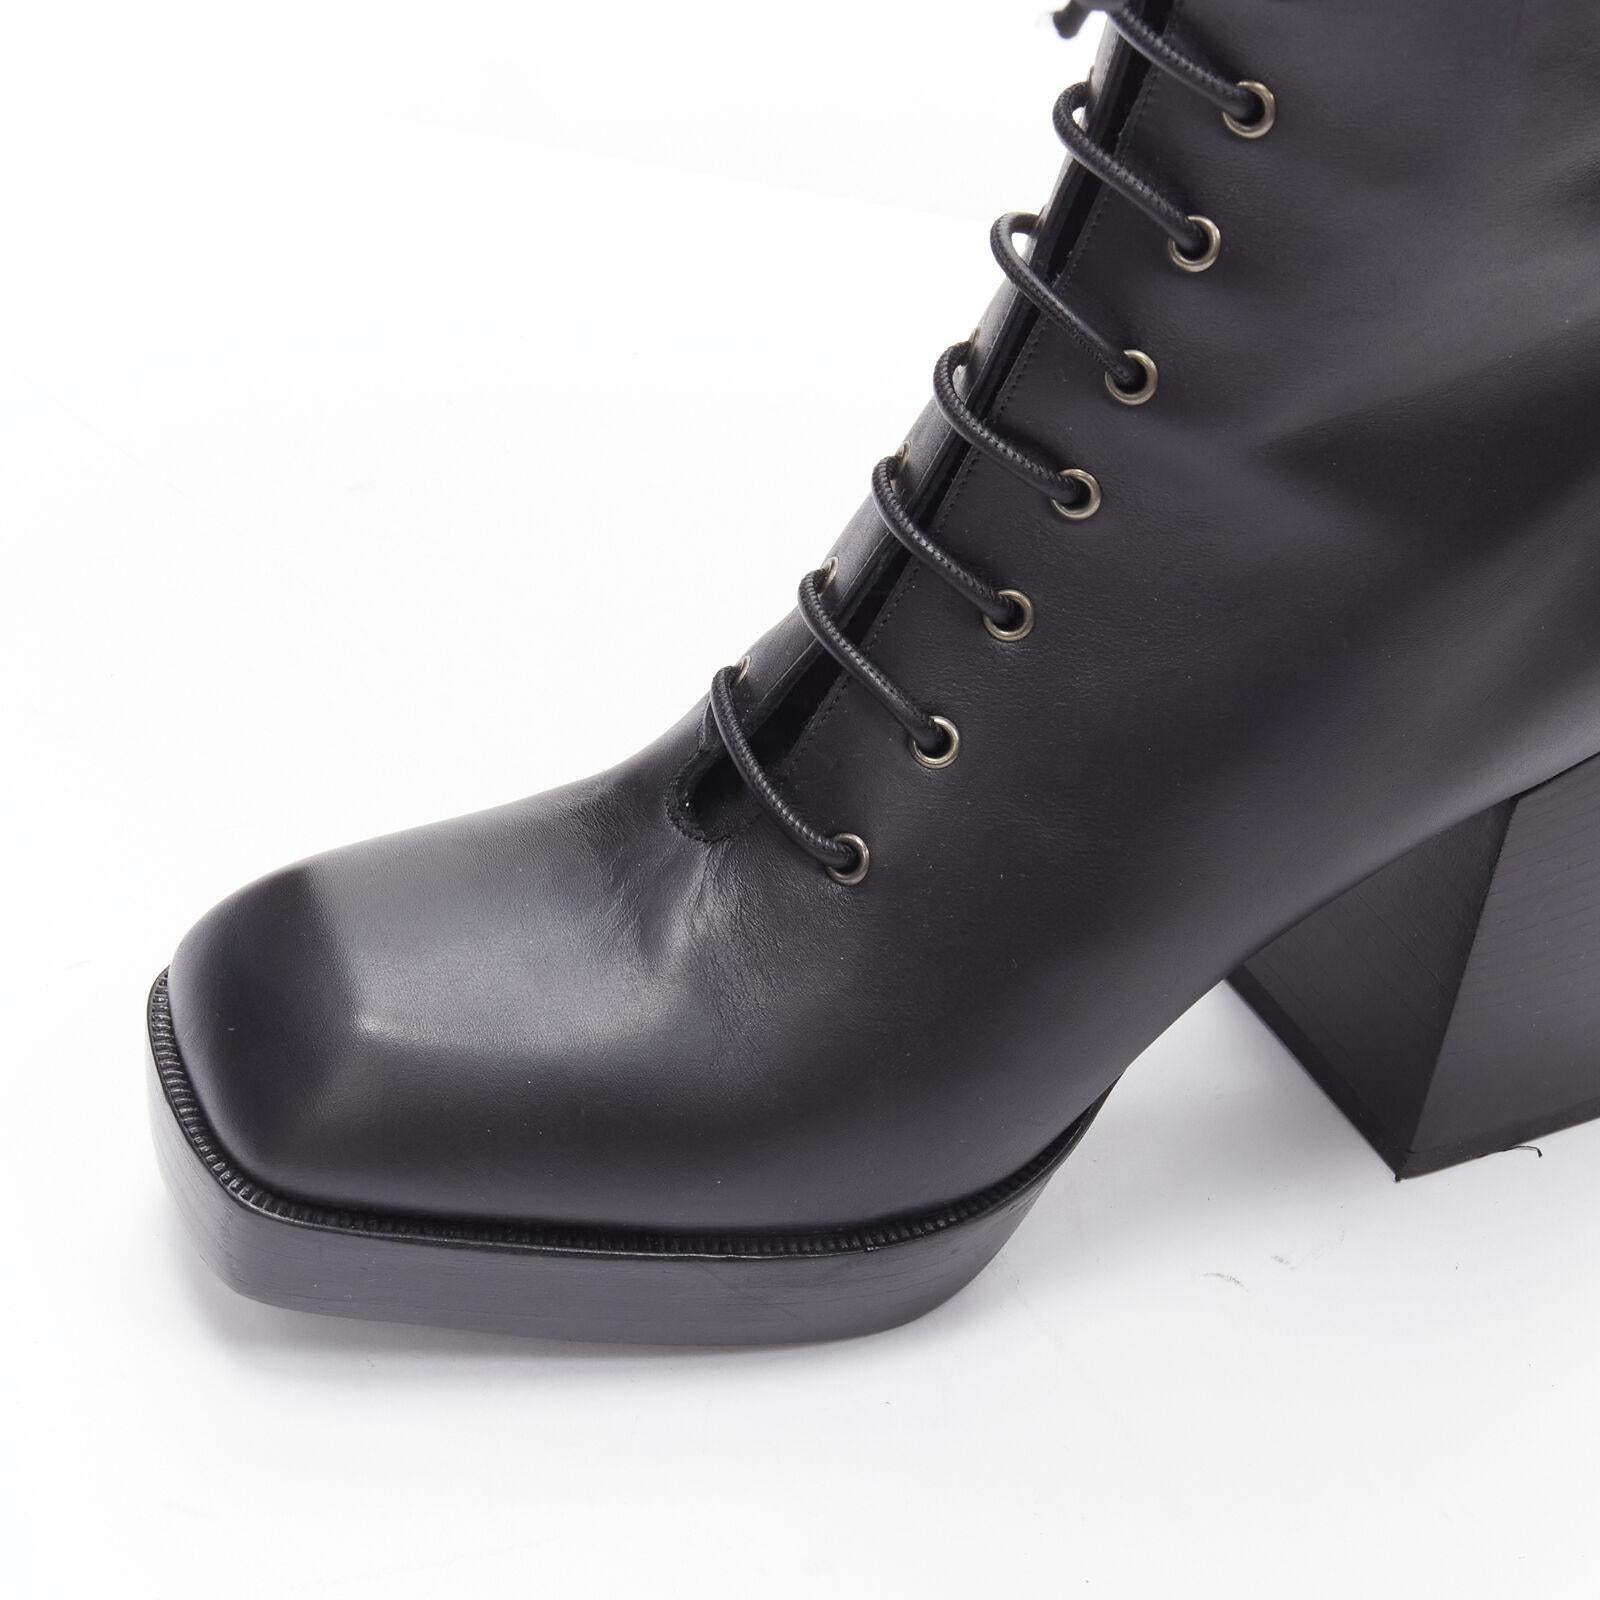 NODALETO black lace up square toe block heeled platform boots EU39 US9
Reference: AAWC/A00130
Brand: Nodaleto
Material: Leather
Color: Black
Pattern: Solid
Closure: Lace Up
Lining: Leather
Extra Details: Cutout logos at back of ankles.
Made in: